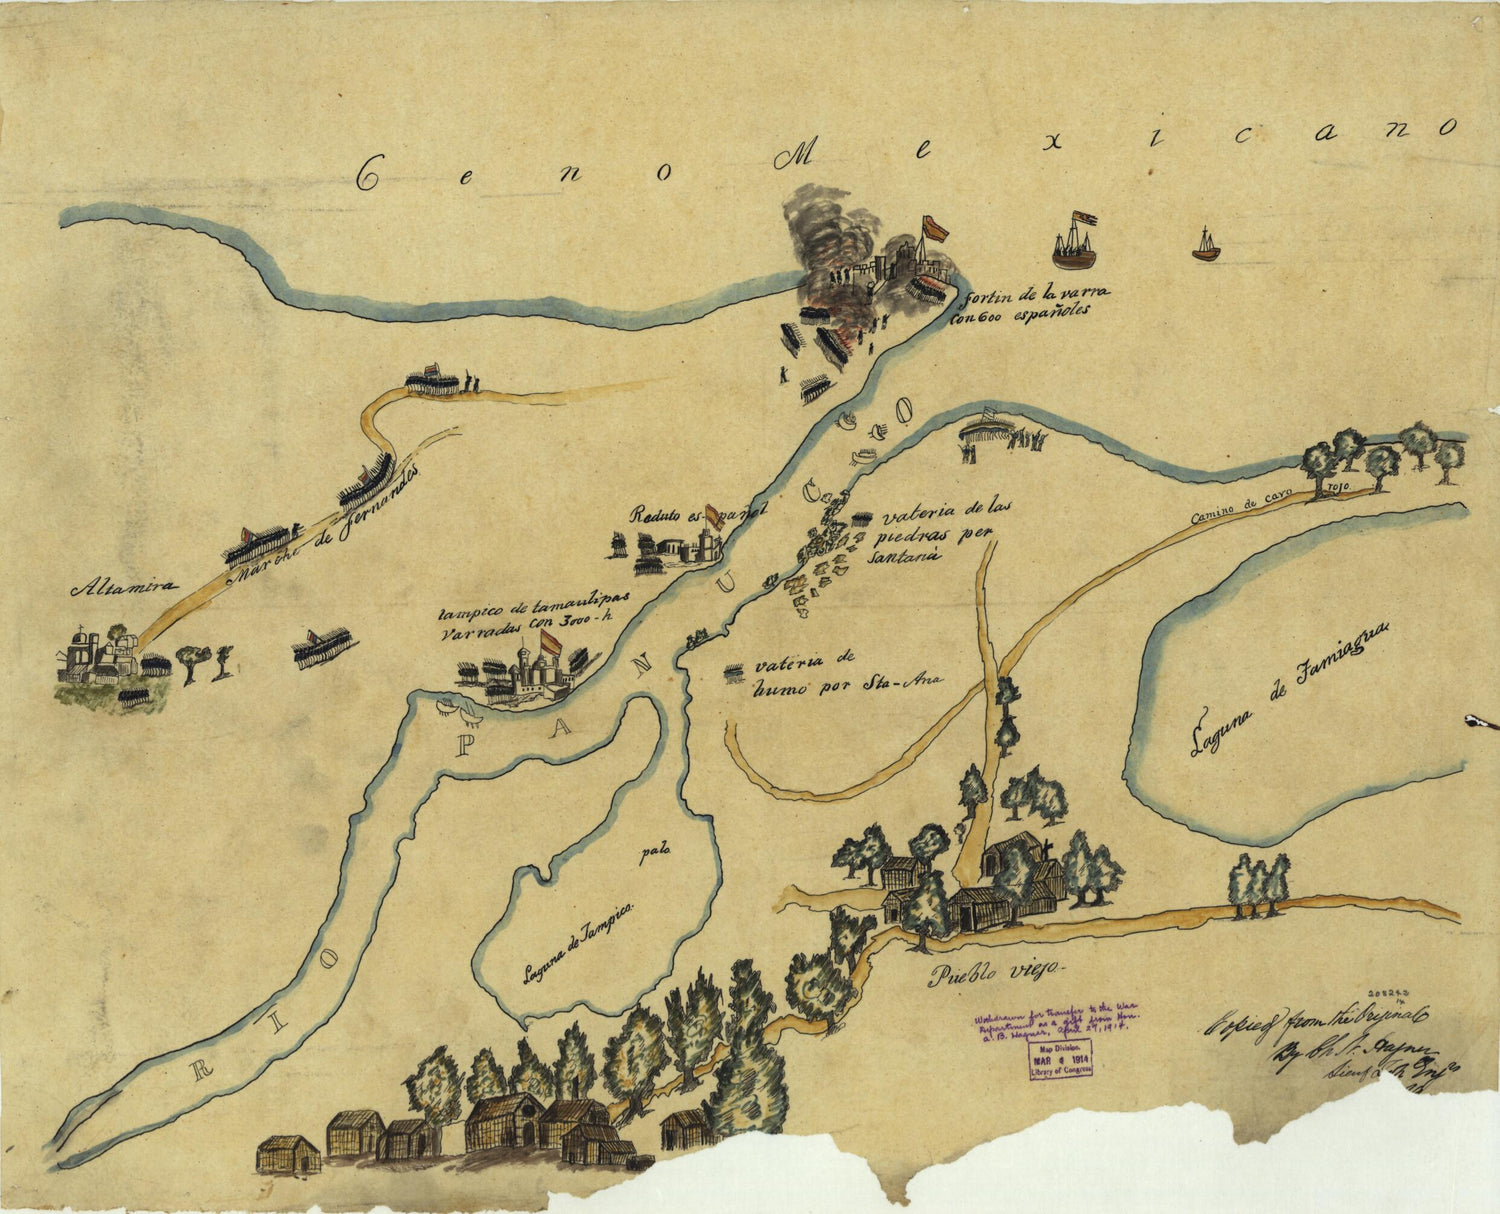 This old map of Map Depicting Battle Against Isidro Barradas In Vicinity of Tampico, Mexico, In 1829 from 1846 was created by Charles N. Hagner in 1846